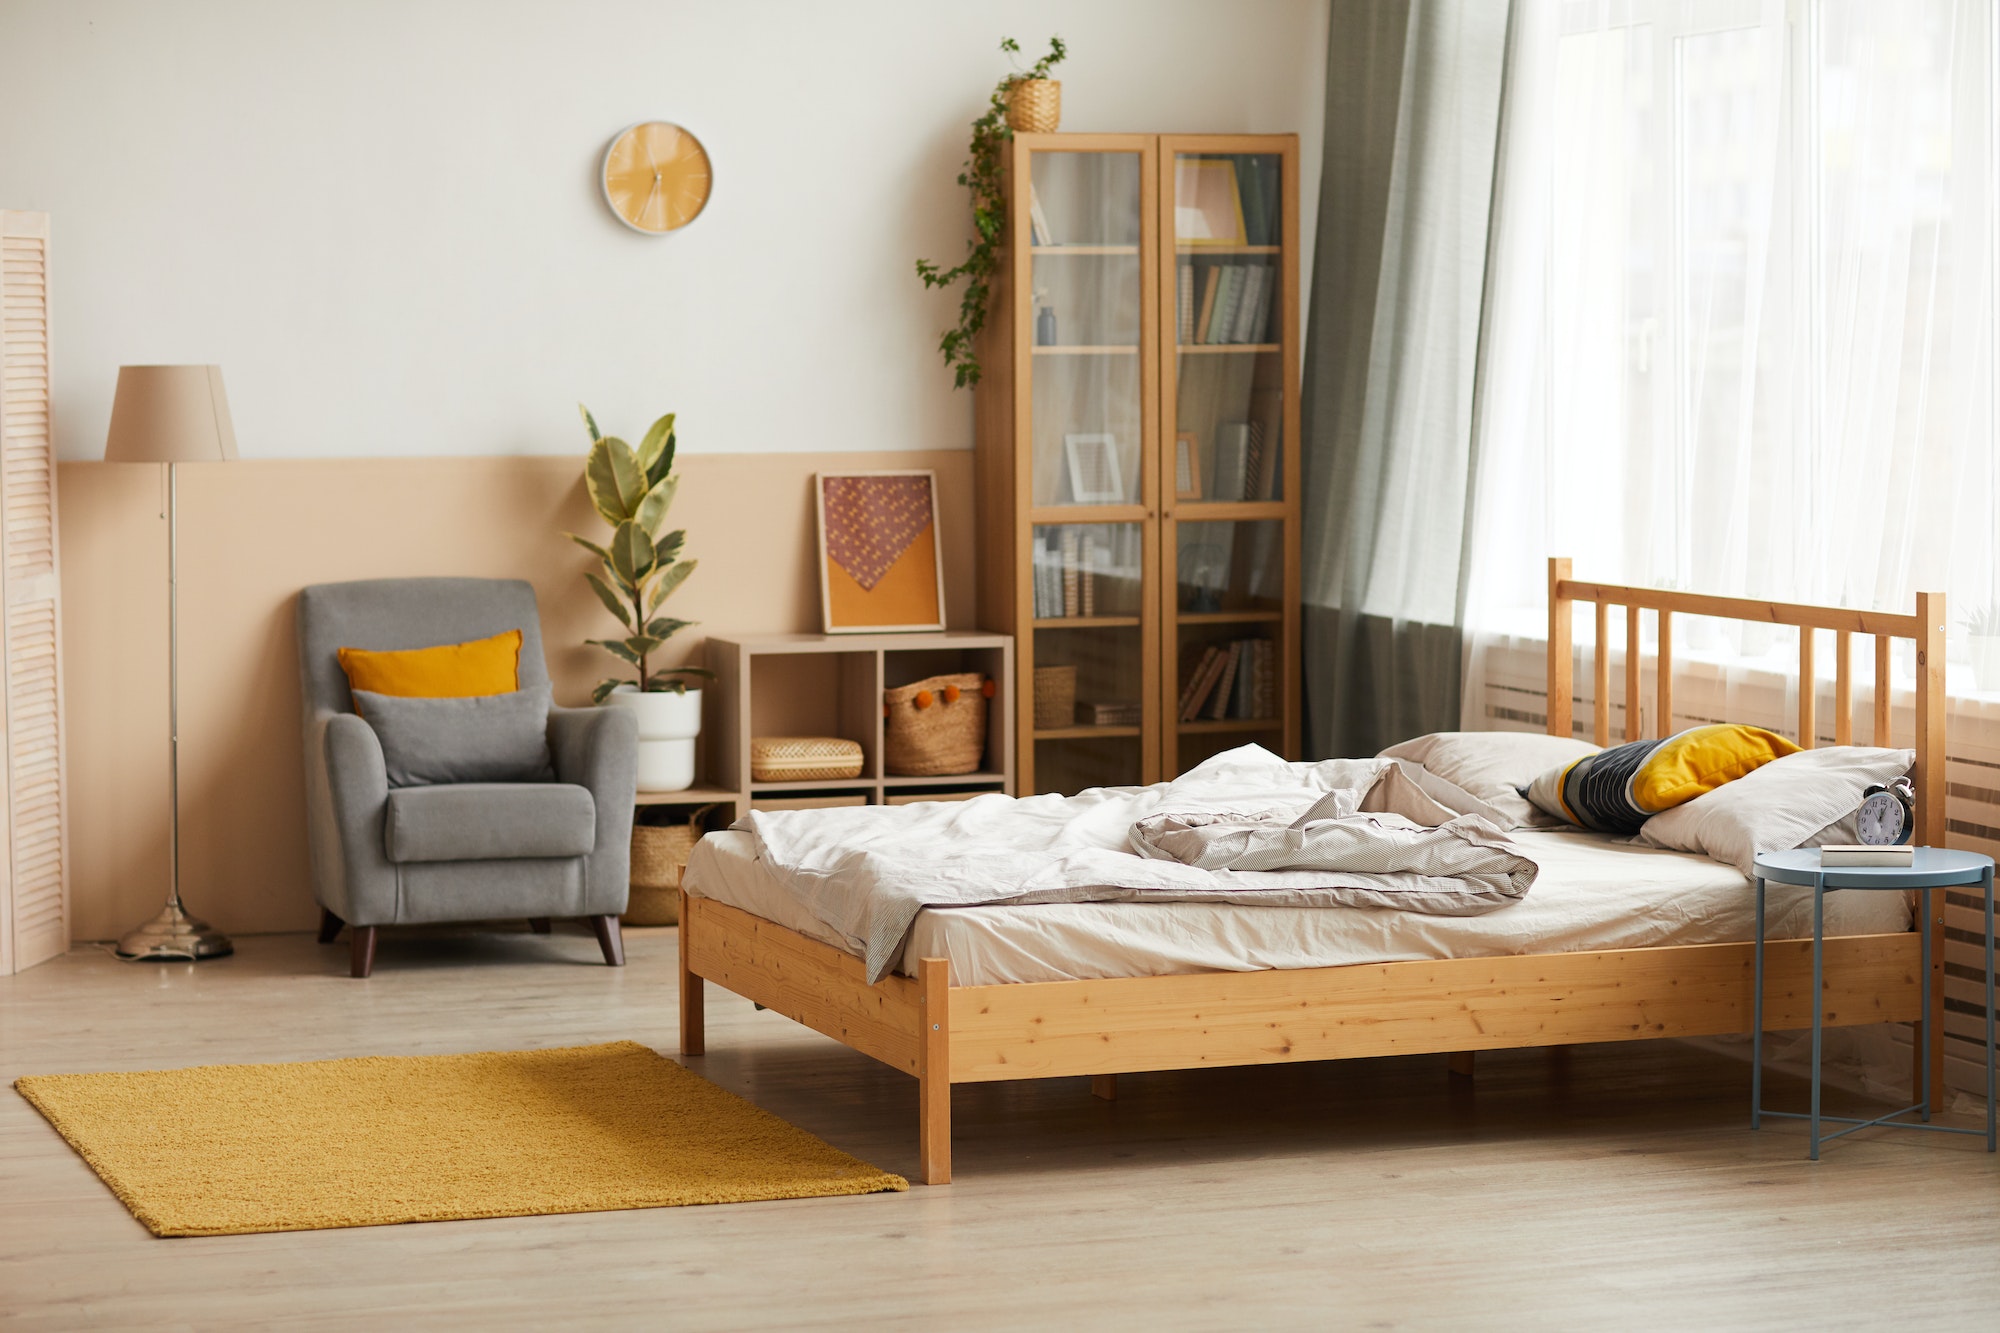 3 Affordable Ways To Upgrade Your Bedroom